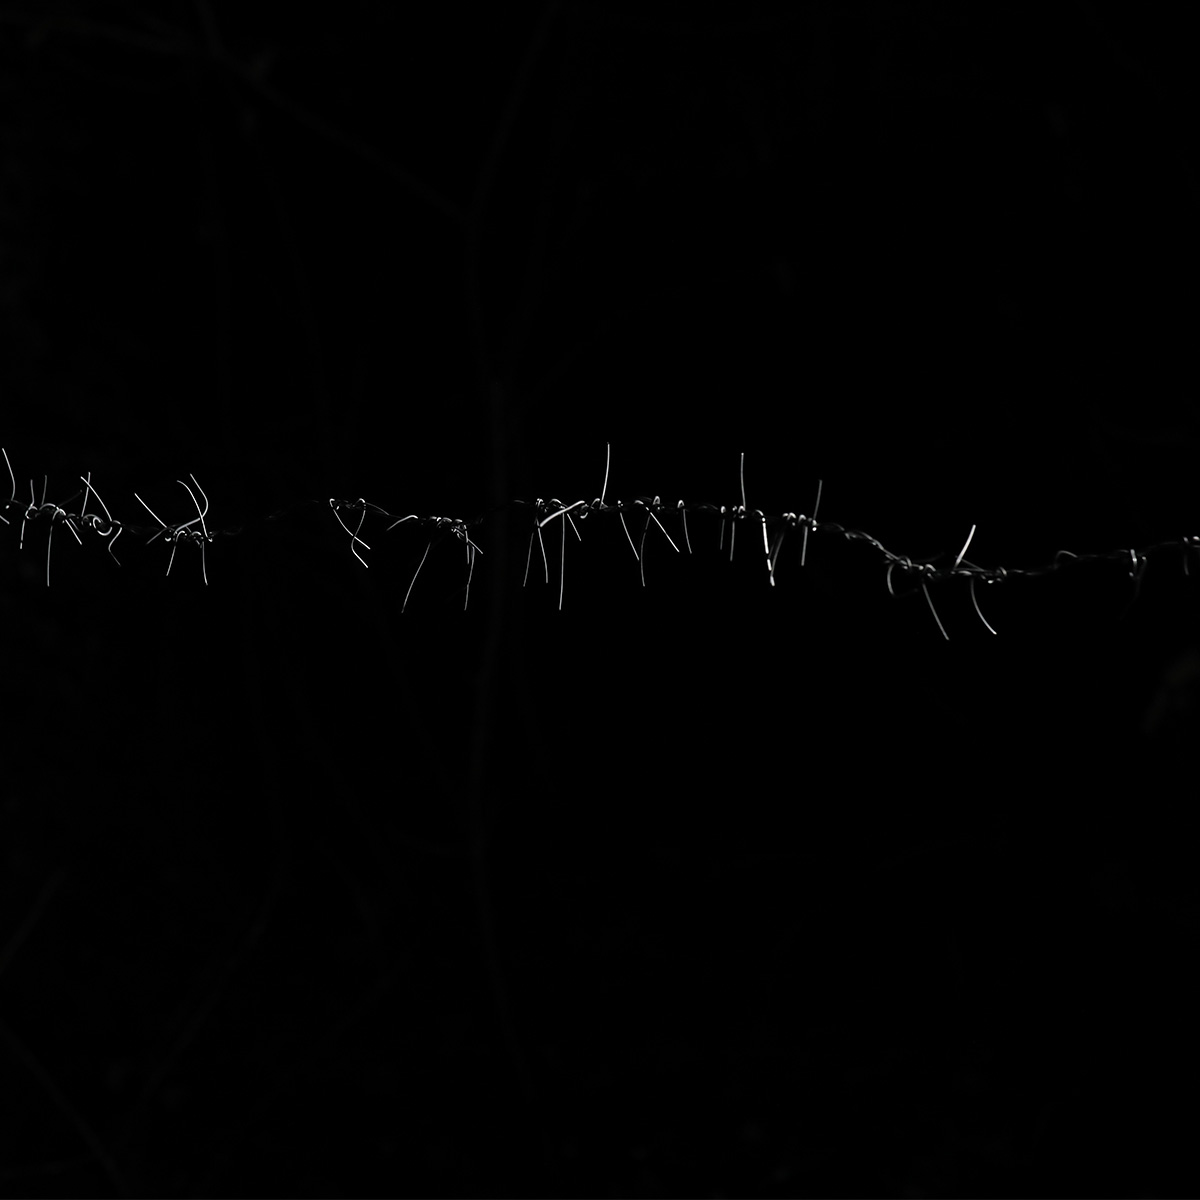 A dark photograph of light catching barbed-wire.